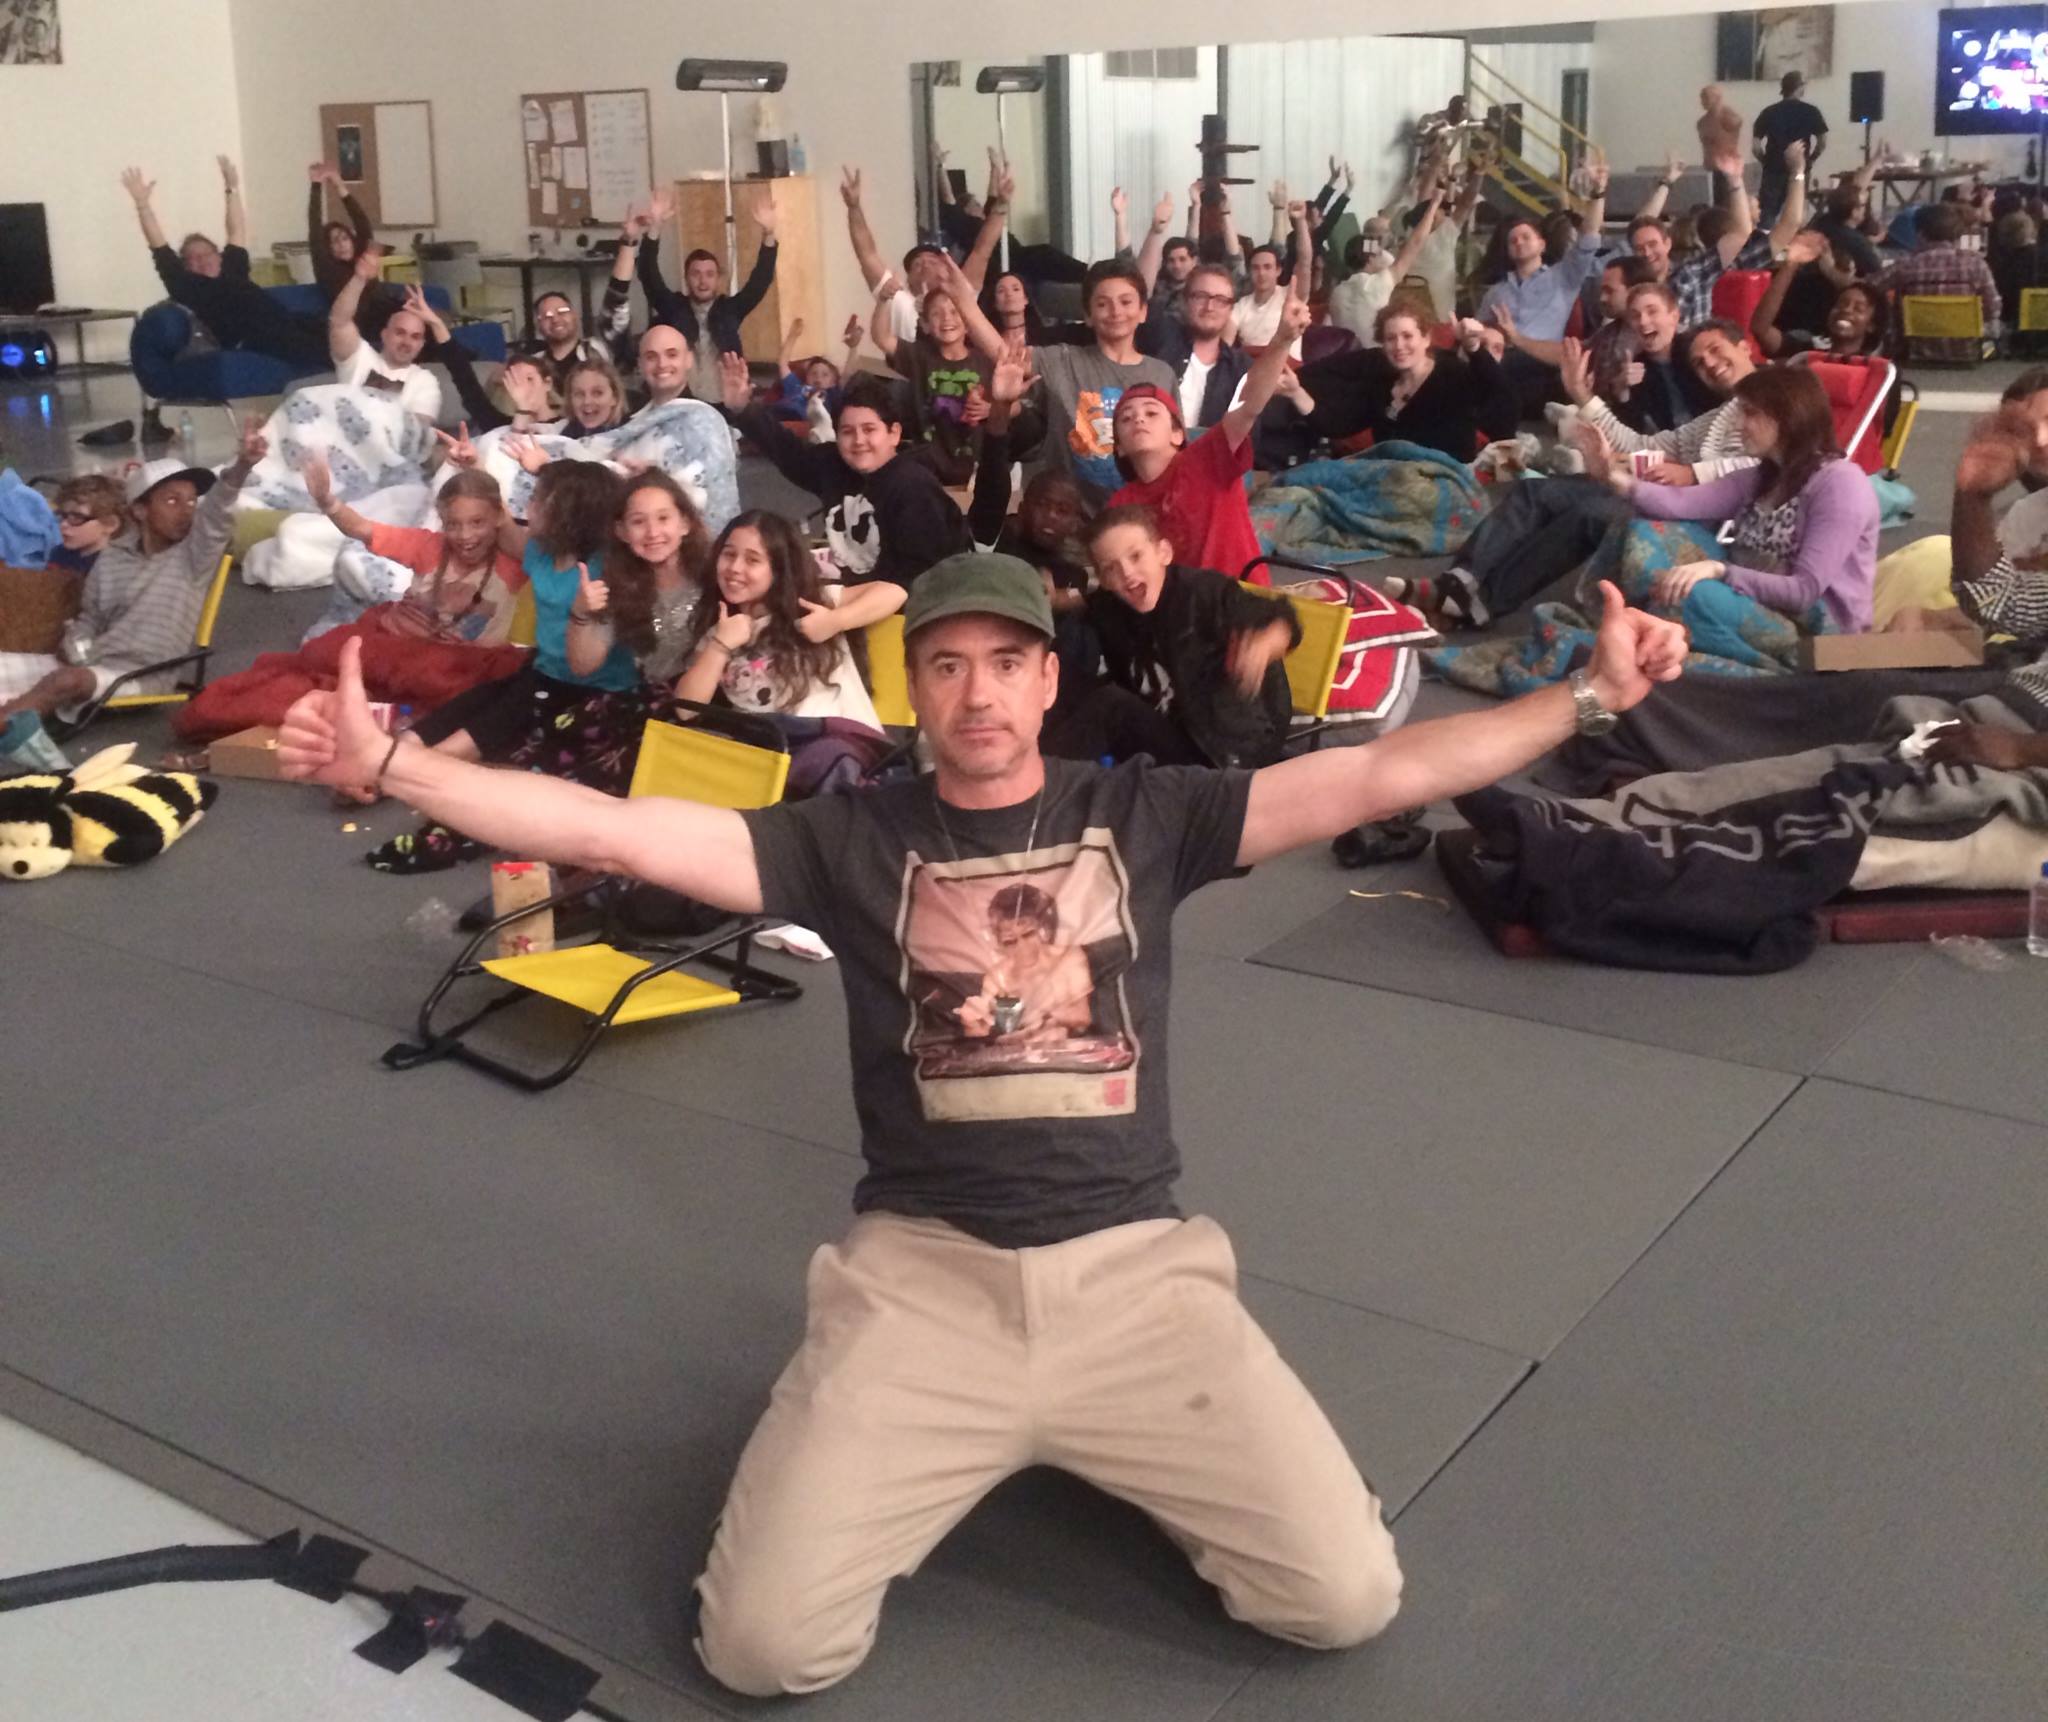 Robert Downey Jr invites a bunch of kids over to watch Captain America 2 on his Birthday.